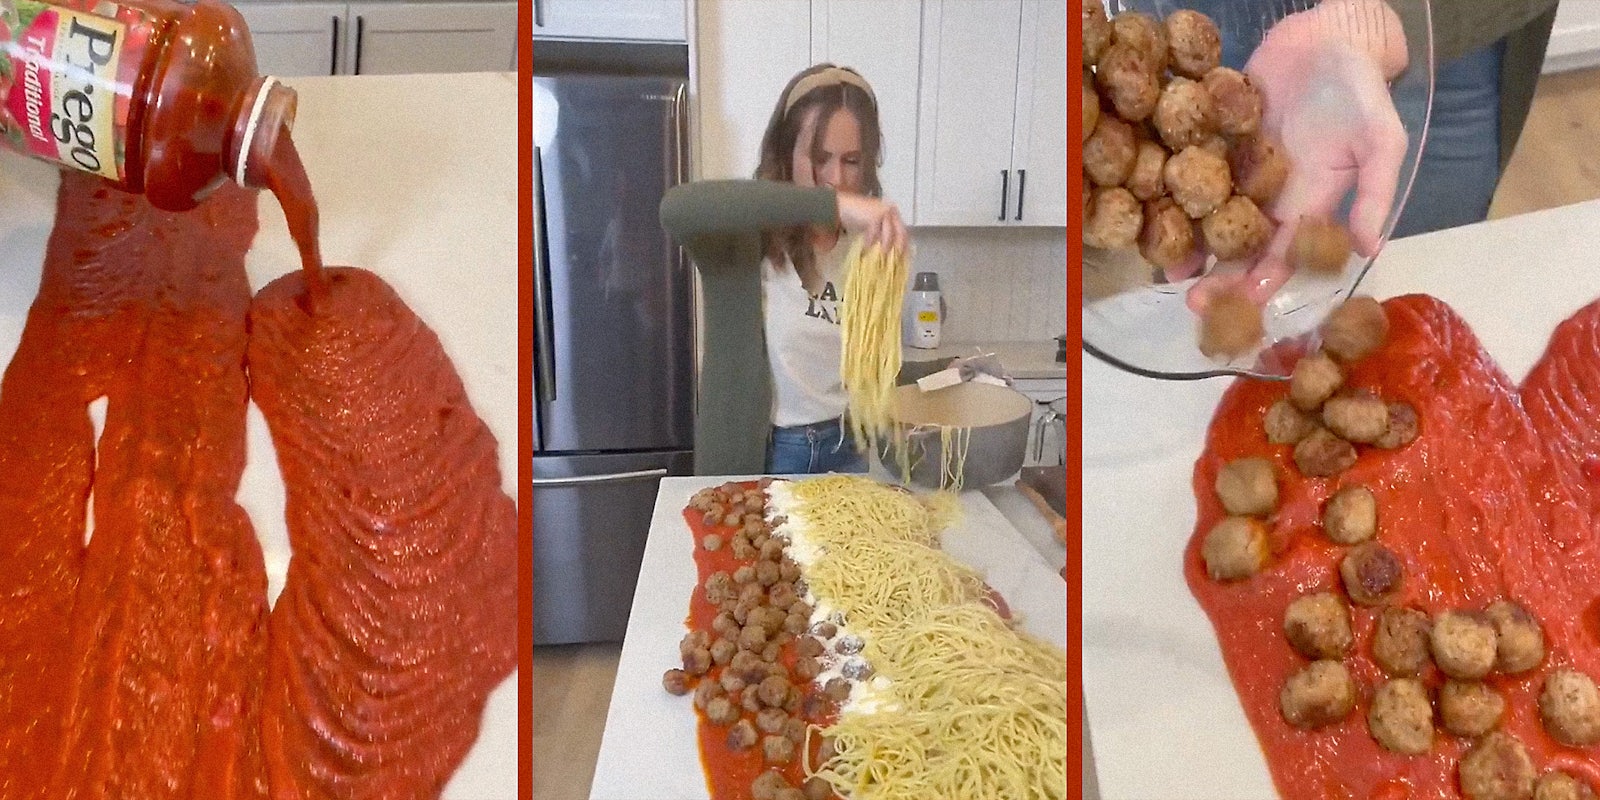 A woman making pasta on a table.